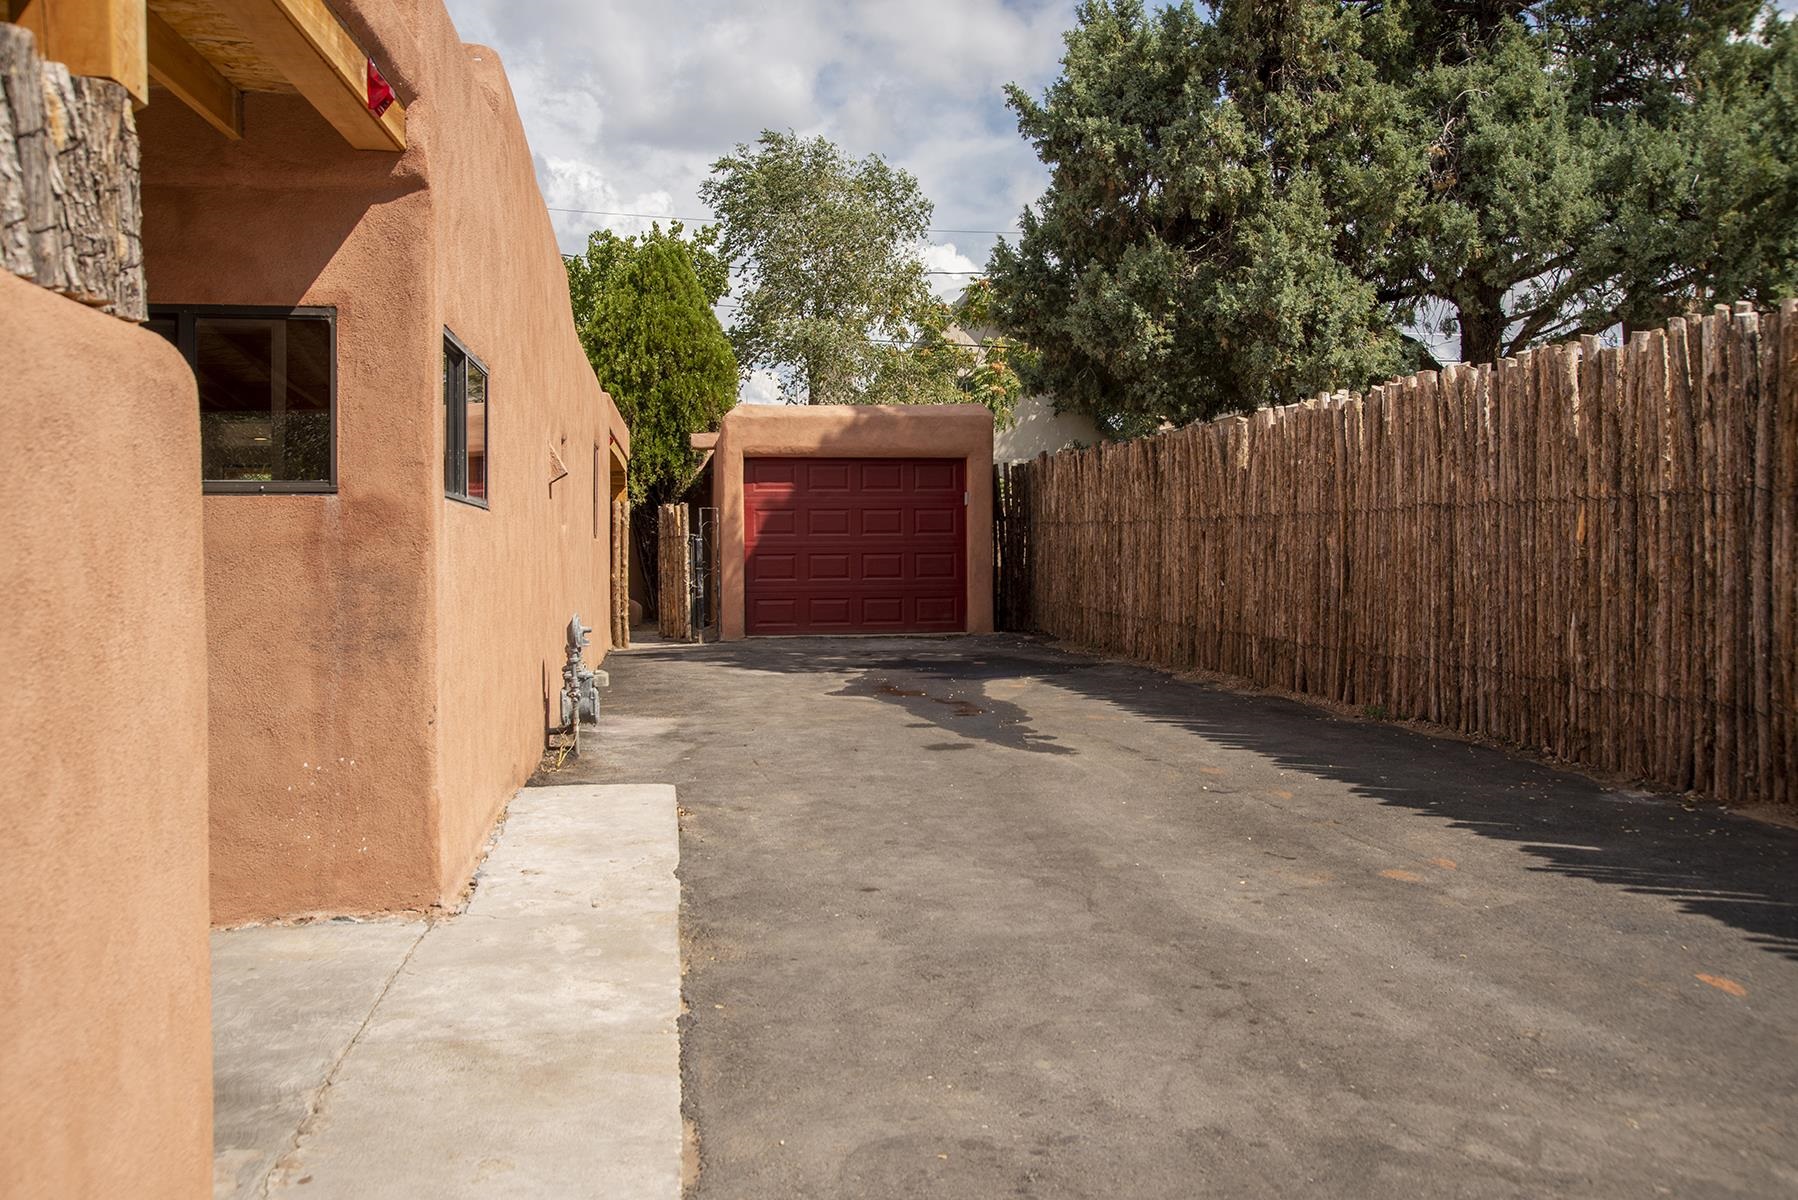 539 Onate, Santa Fe, New Mexico 87501, 2 Bedrooms Bedrooms, ,2 BathroomsBathrooms,Residential,For Sale,539 Onate,202104332